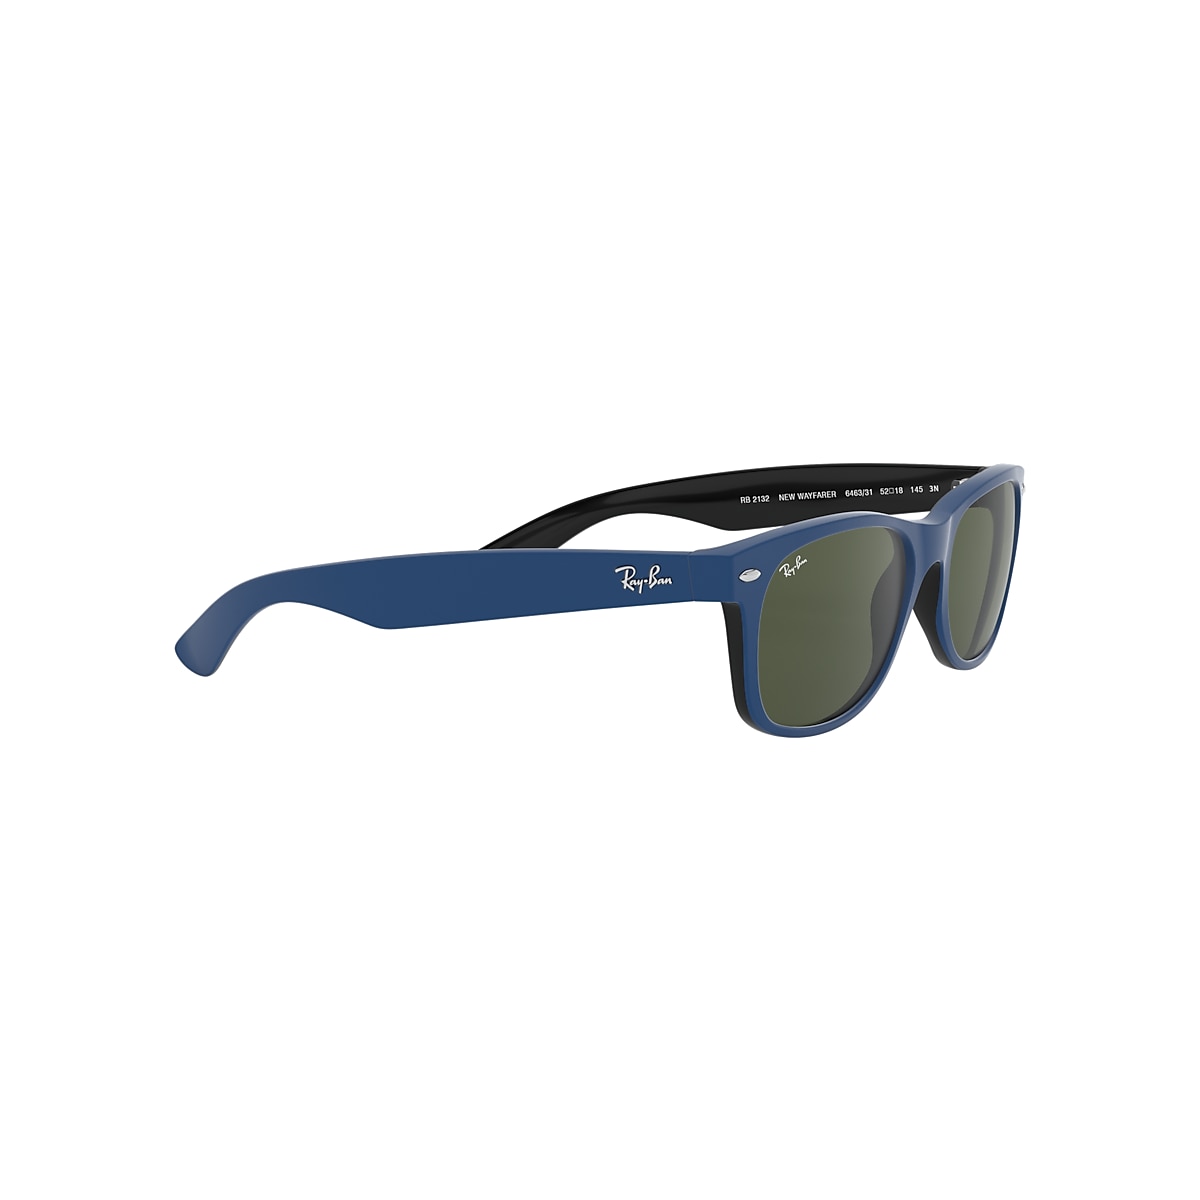 WAYFARER MIX Sunglasses in Blue and Green - RB2132 | Ray-Ban® US